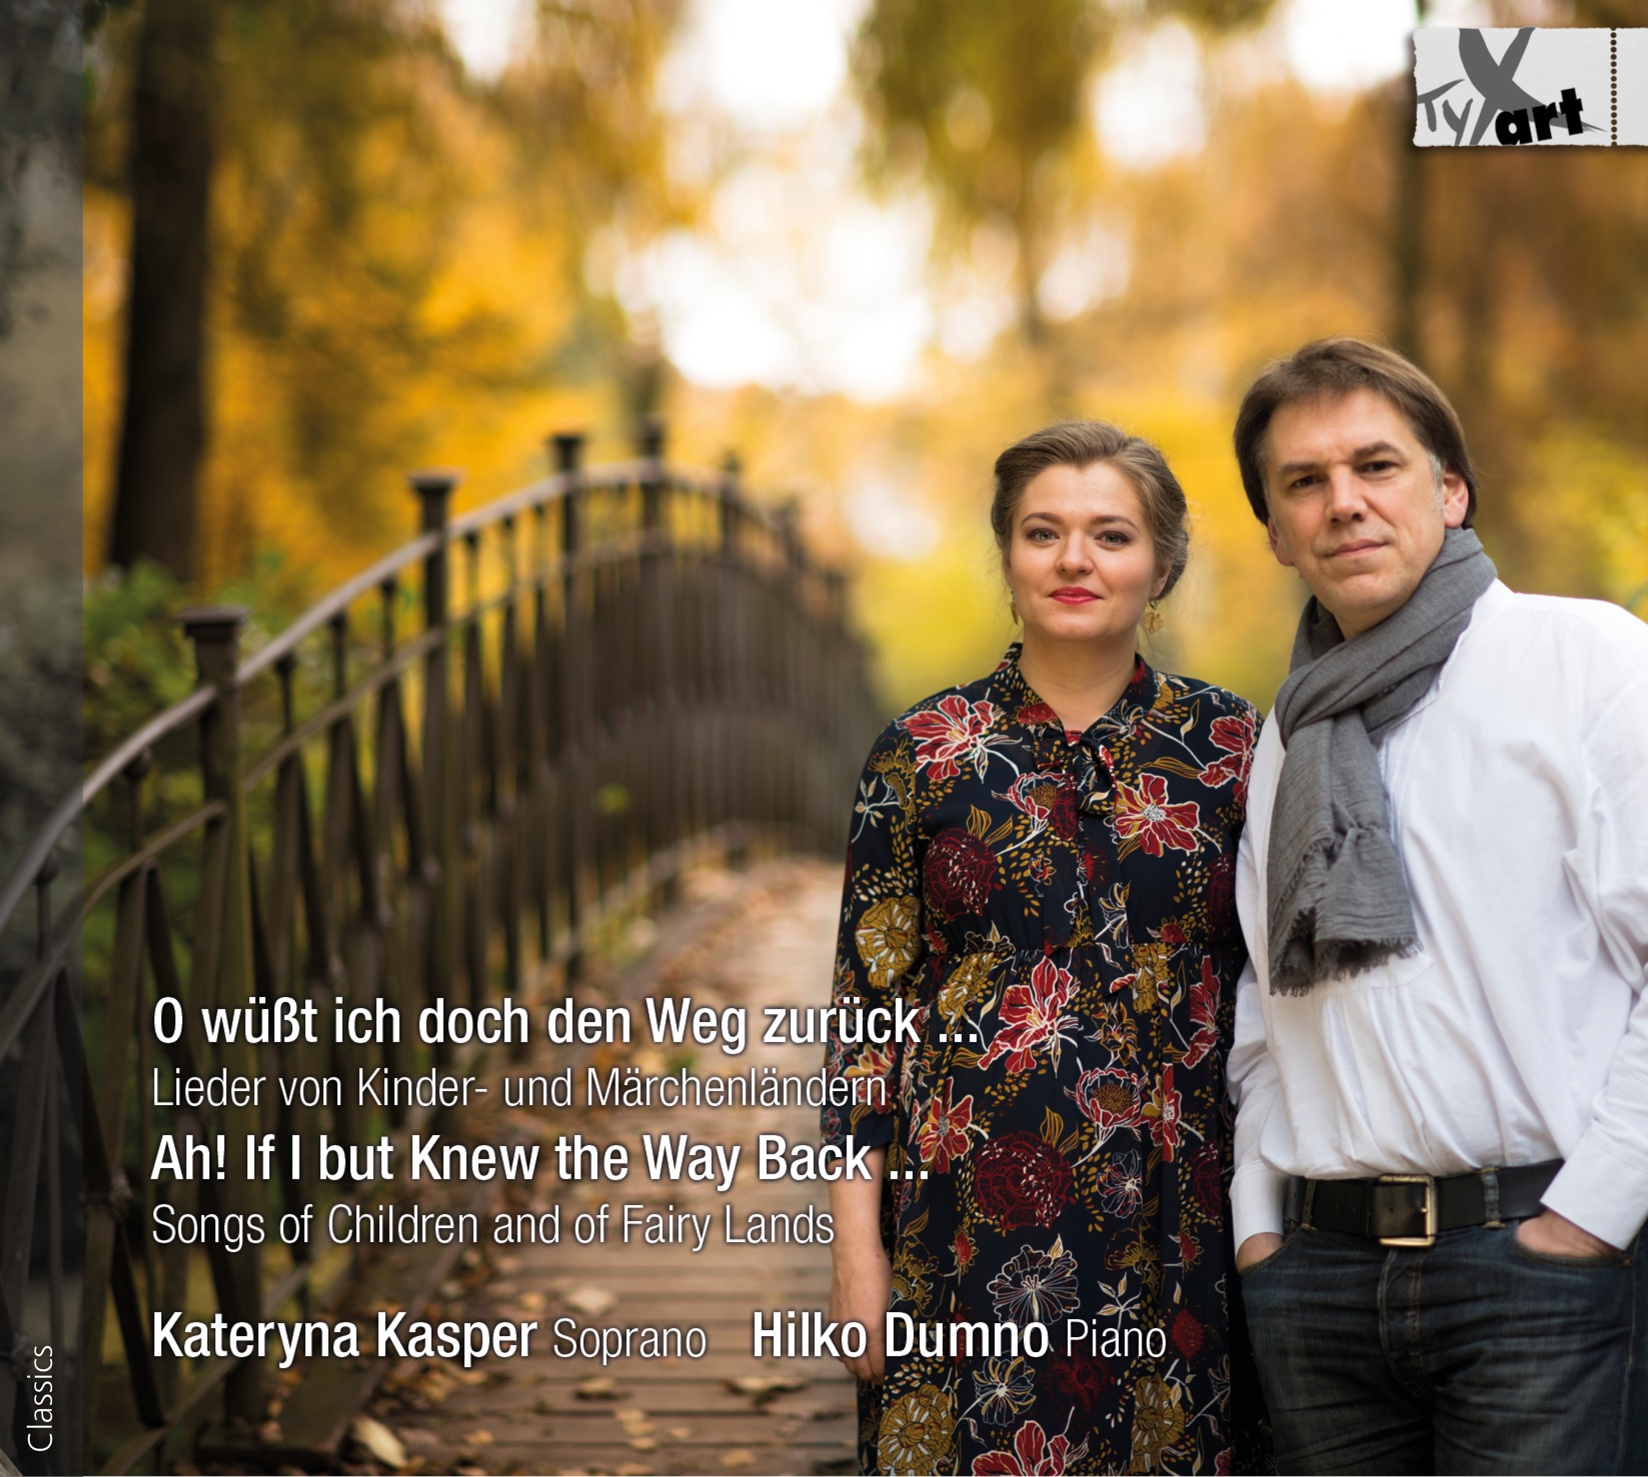 Songs of Children and of Fairy Lands - Kateryna Kasper and Hilko Dumno